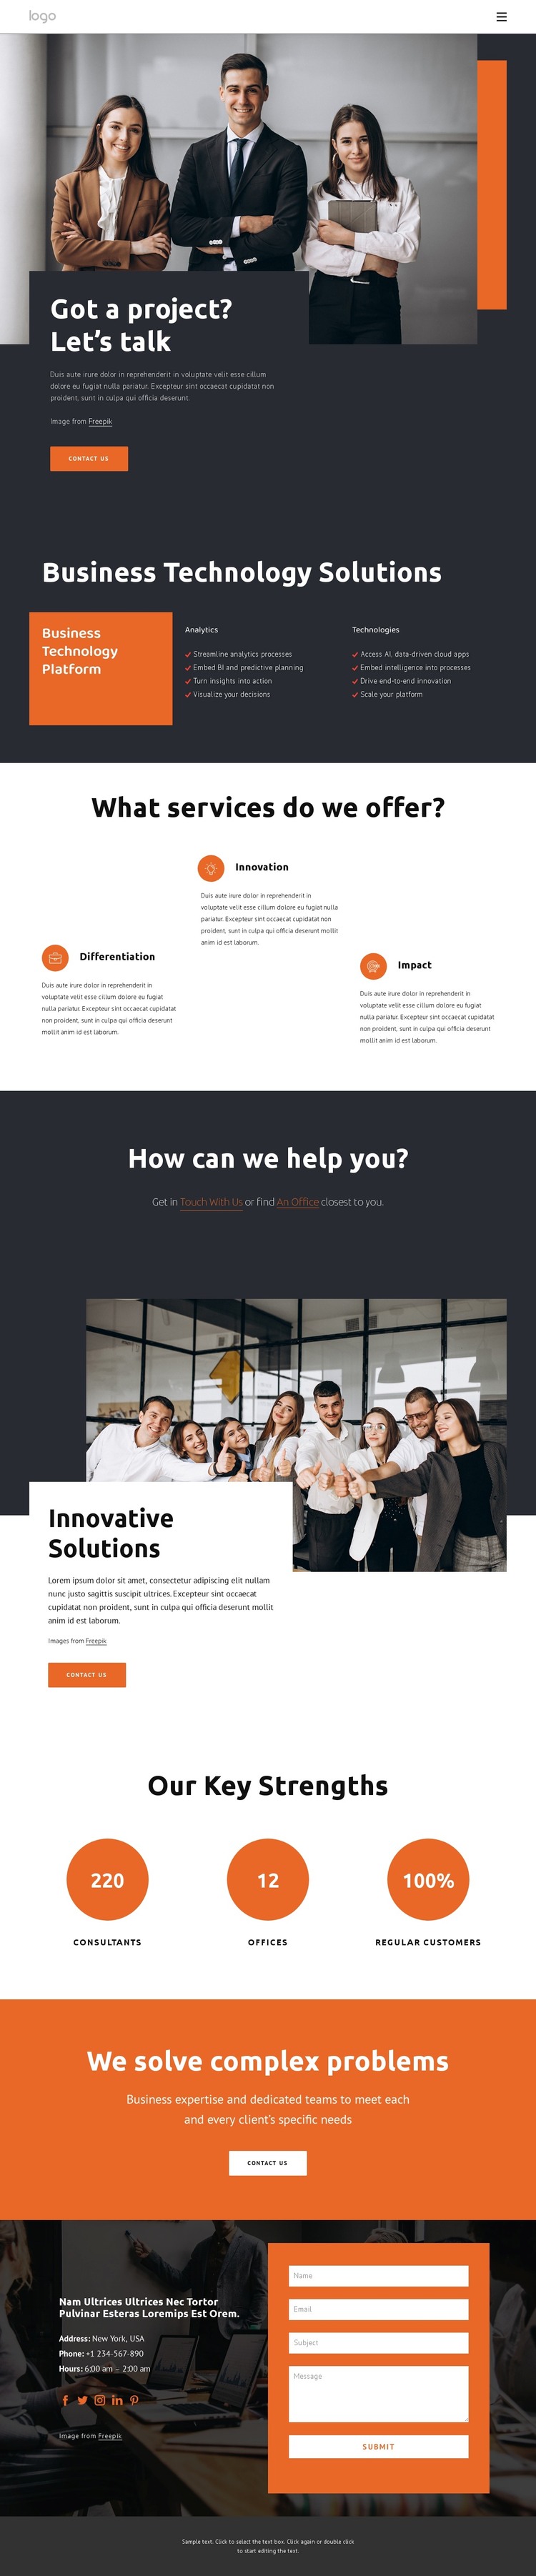 One of the best-known firms WordPress Theme